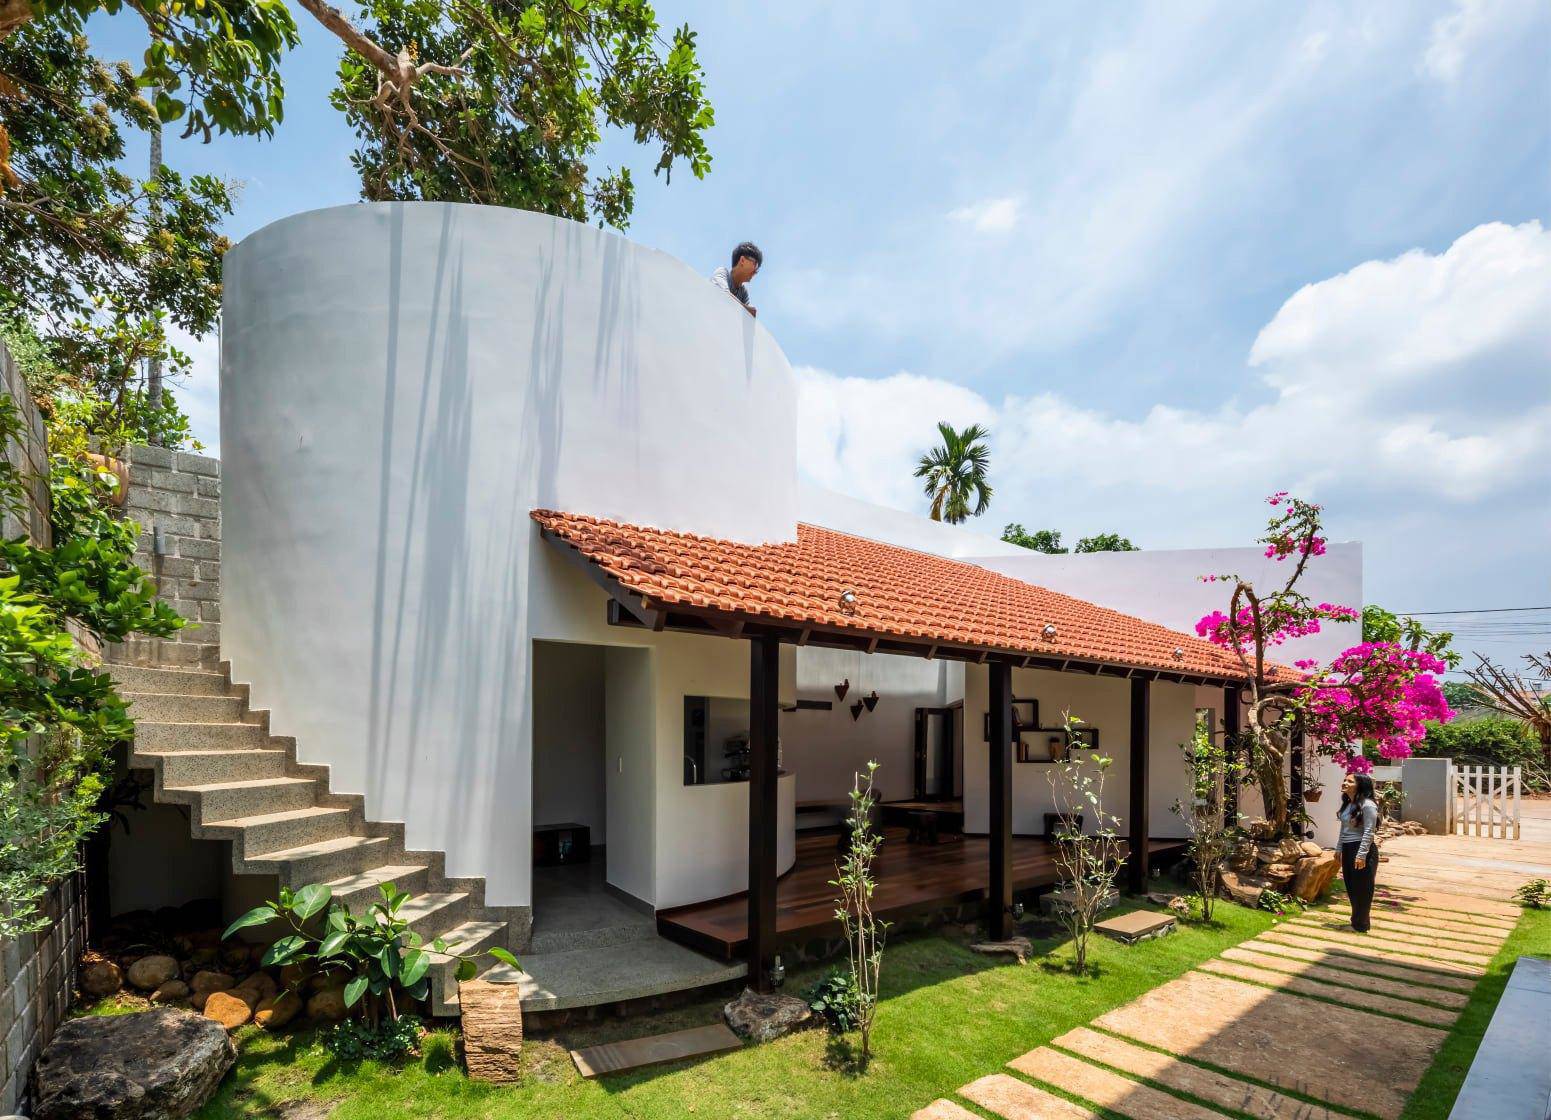 4-level house with tiled roof in the picturesque Central Highlands style - 5